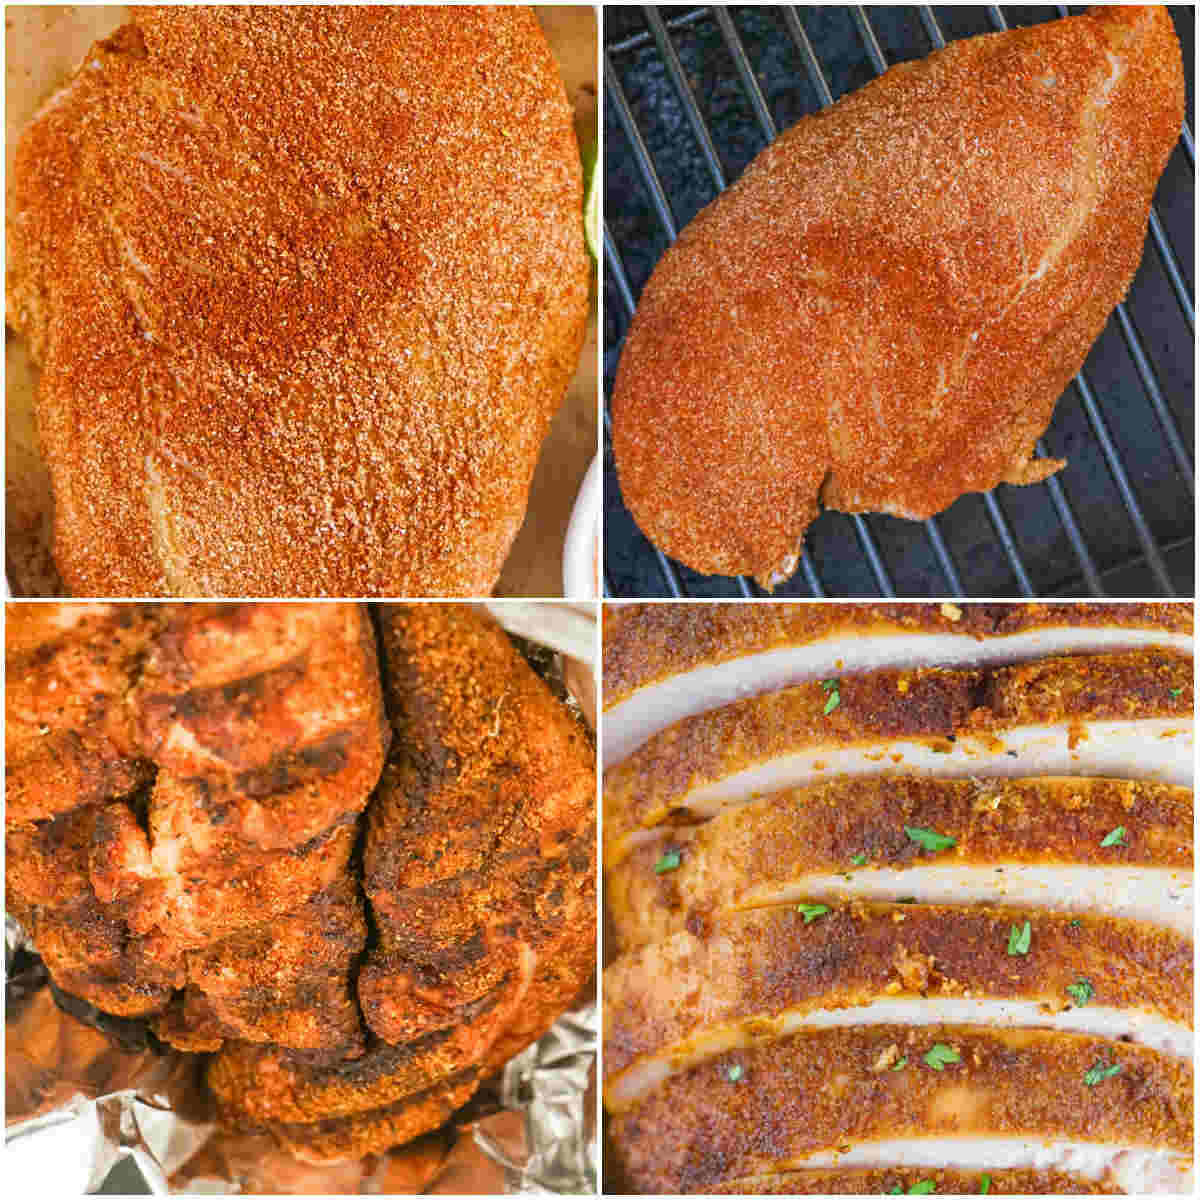 How to smoke a turkey breast with step by step images.